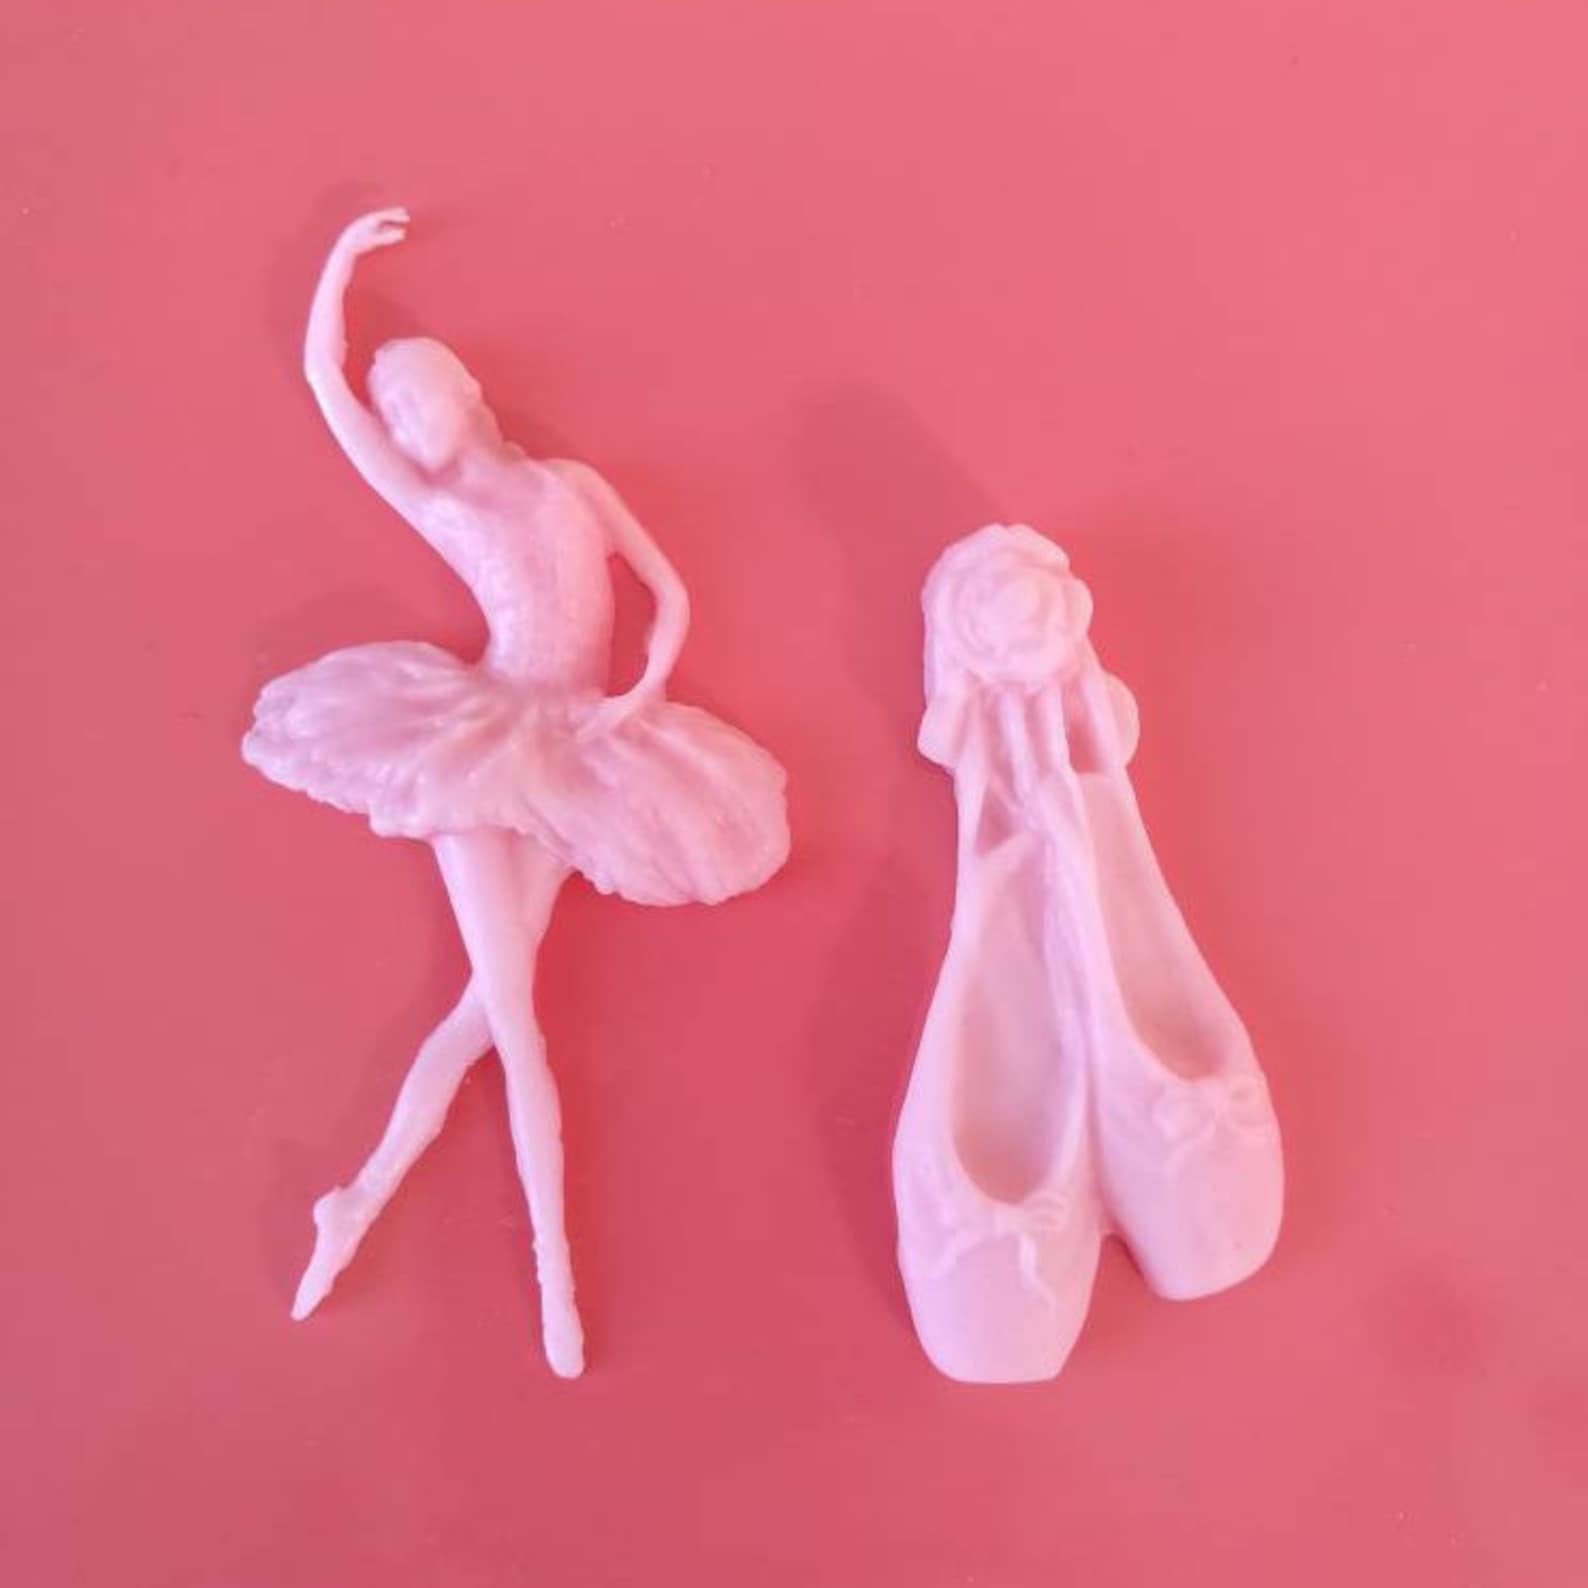 ballerina and ballet shoes edible fondant toppers. cakes cupcakes cookies toppers and decoration